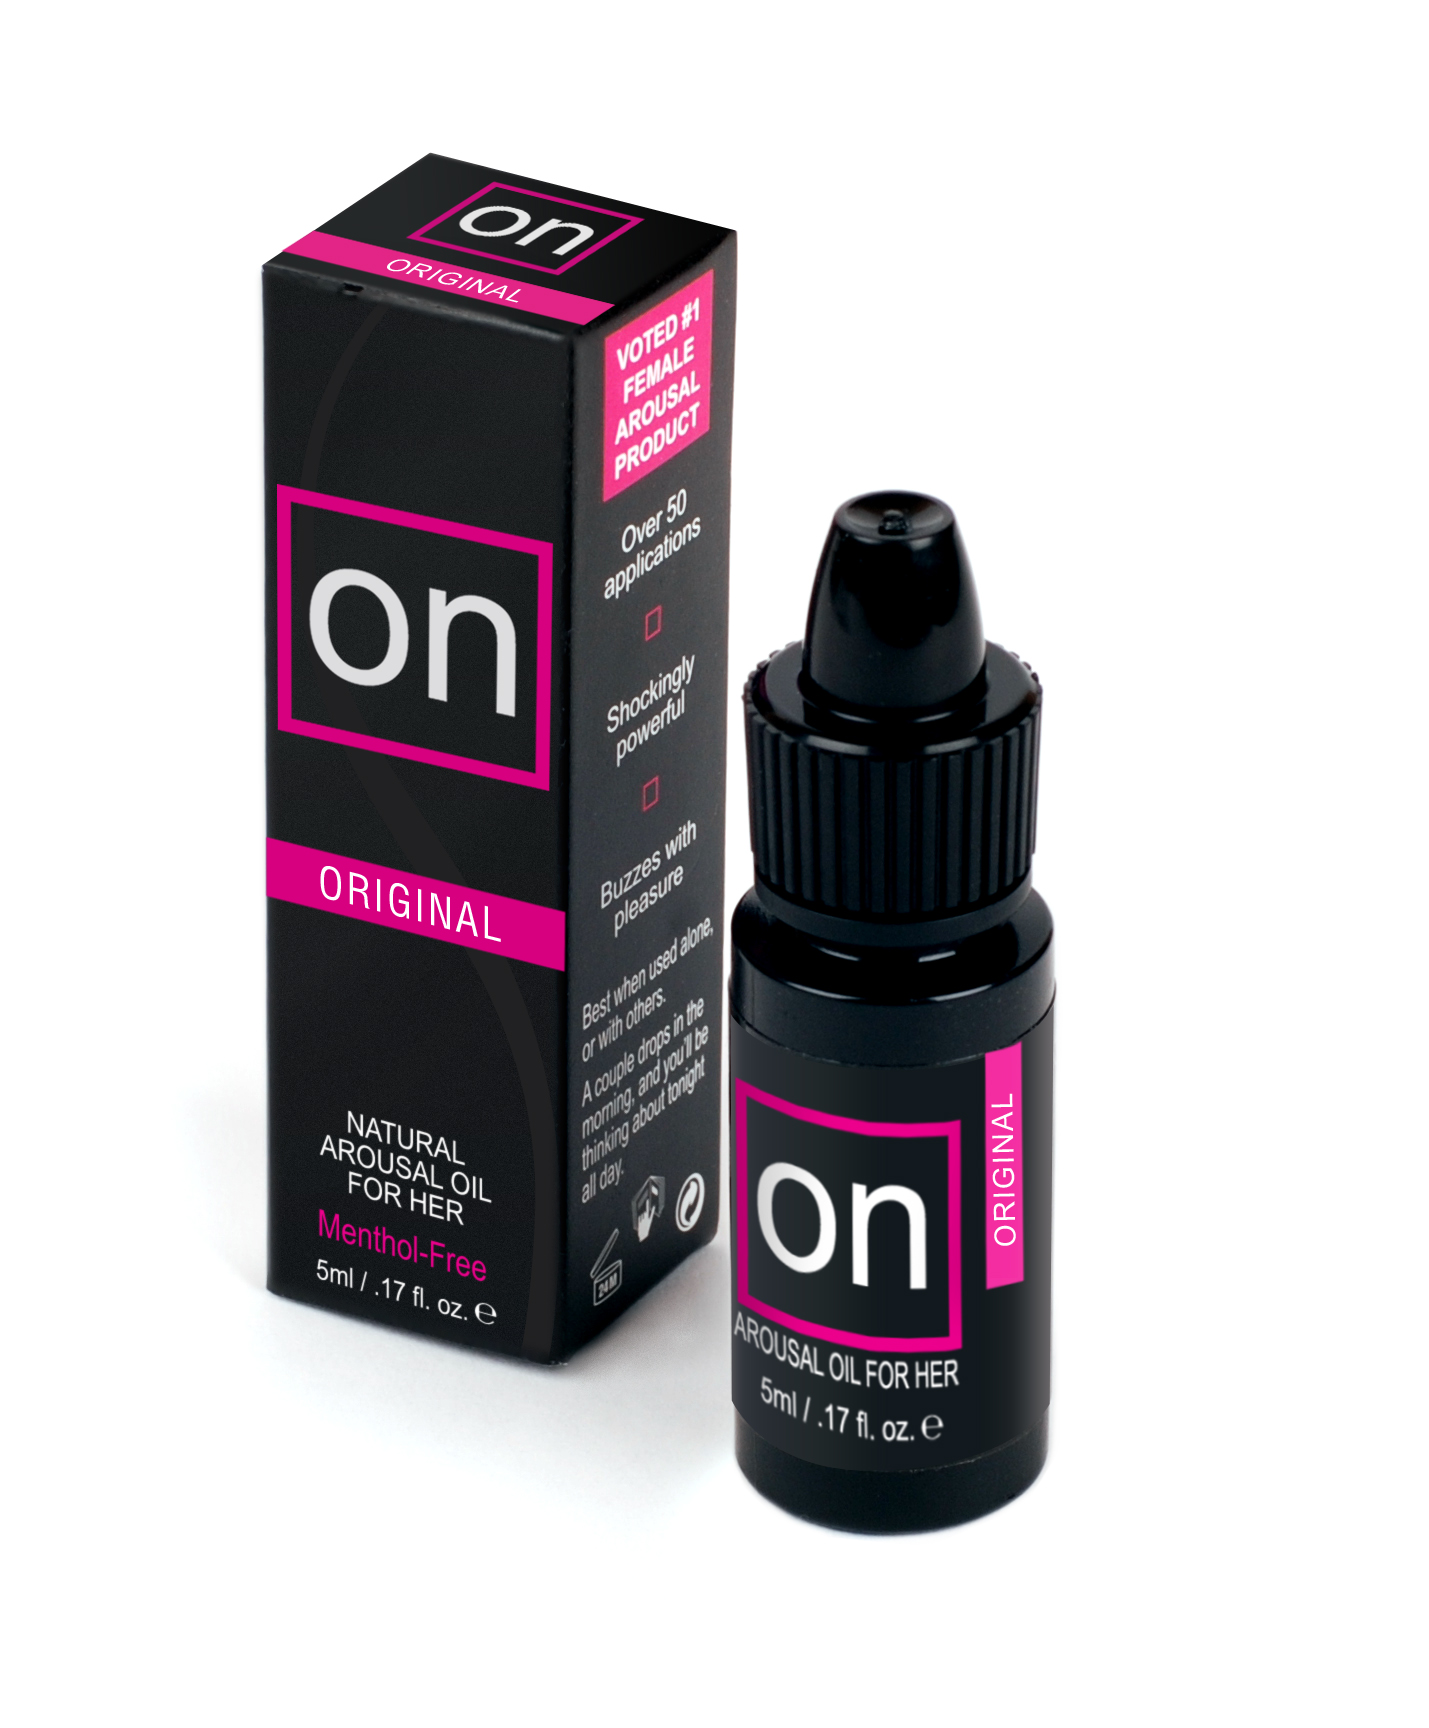 ON NATURAL AROUSAL OIL FOR HER 5ML MEDIUM BOX - Click Image to Close